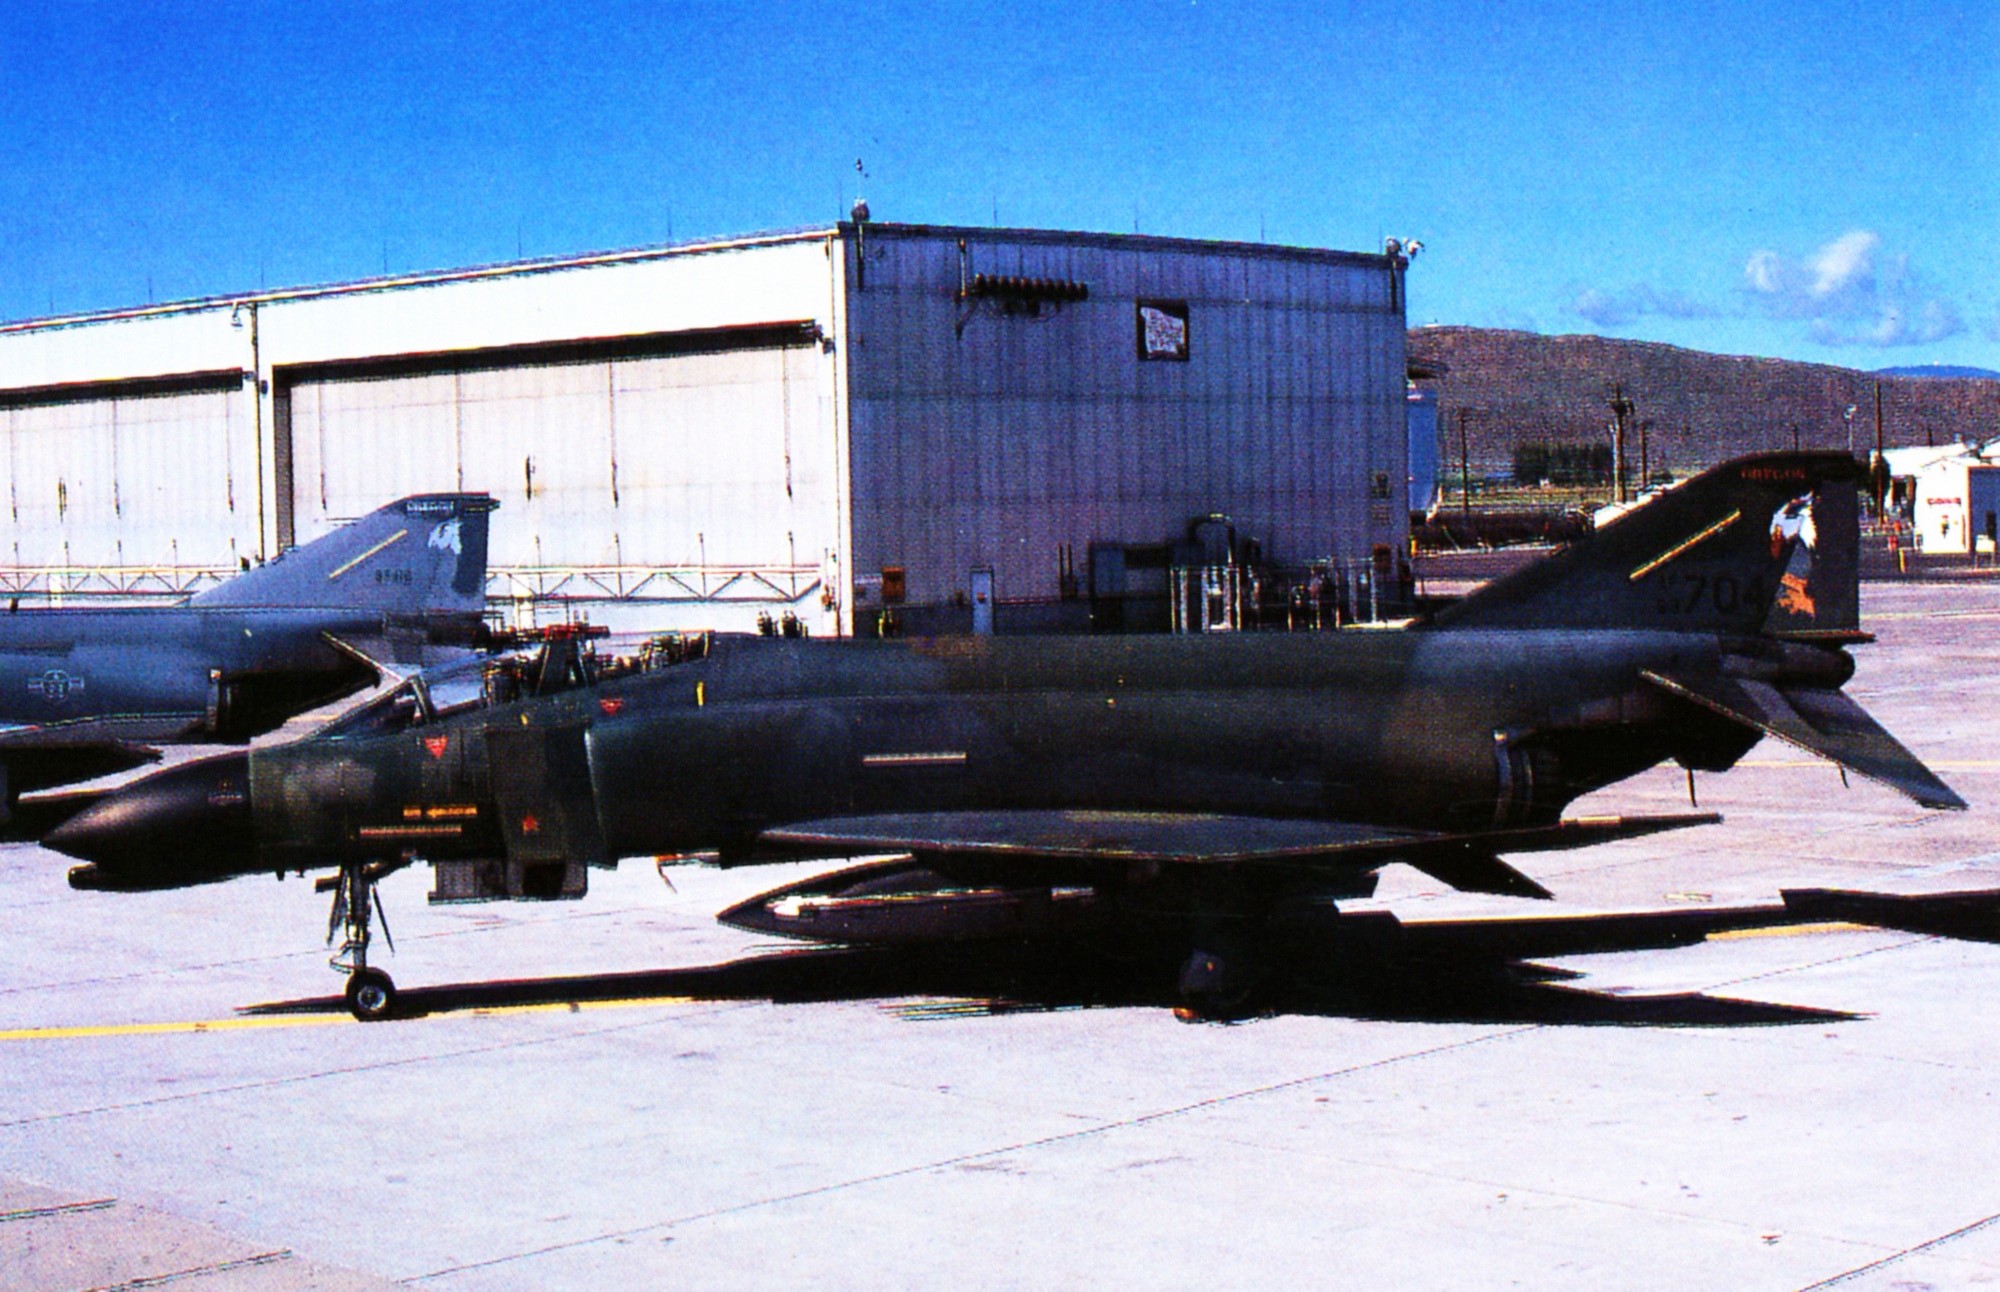 Oregon’s Vietnam Air Warriors – The 142nd Fighter Group’s F-4C Phantom II Fighters with Aerial Victories